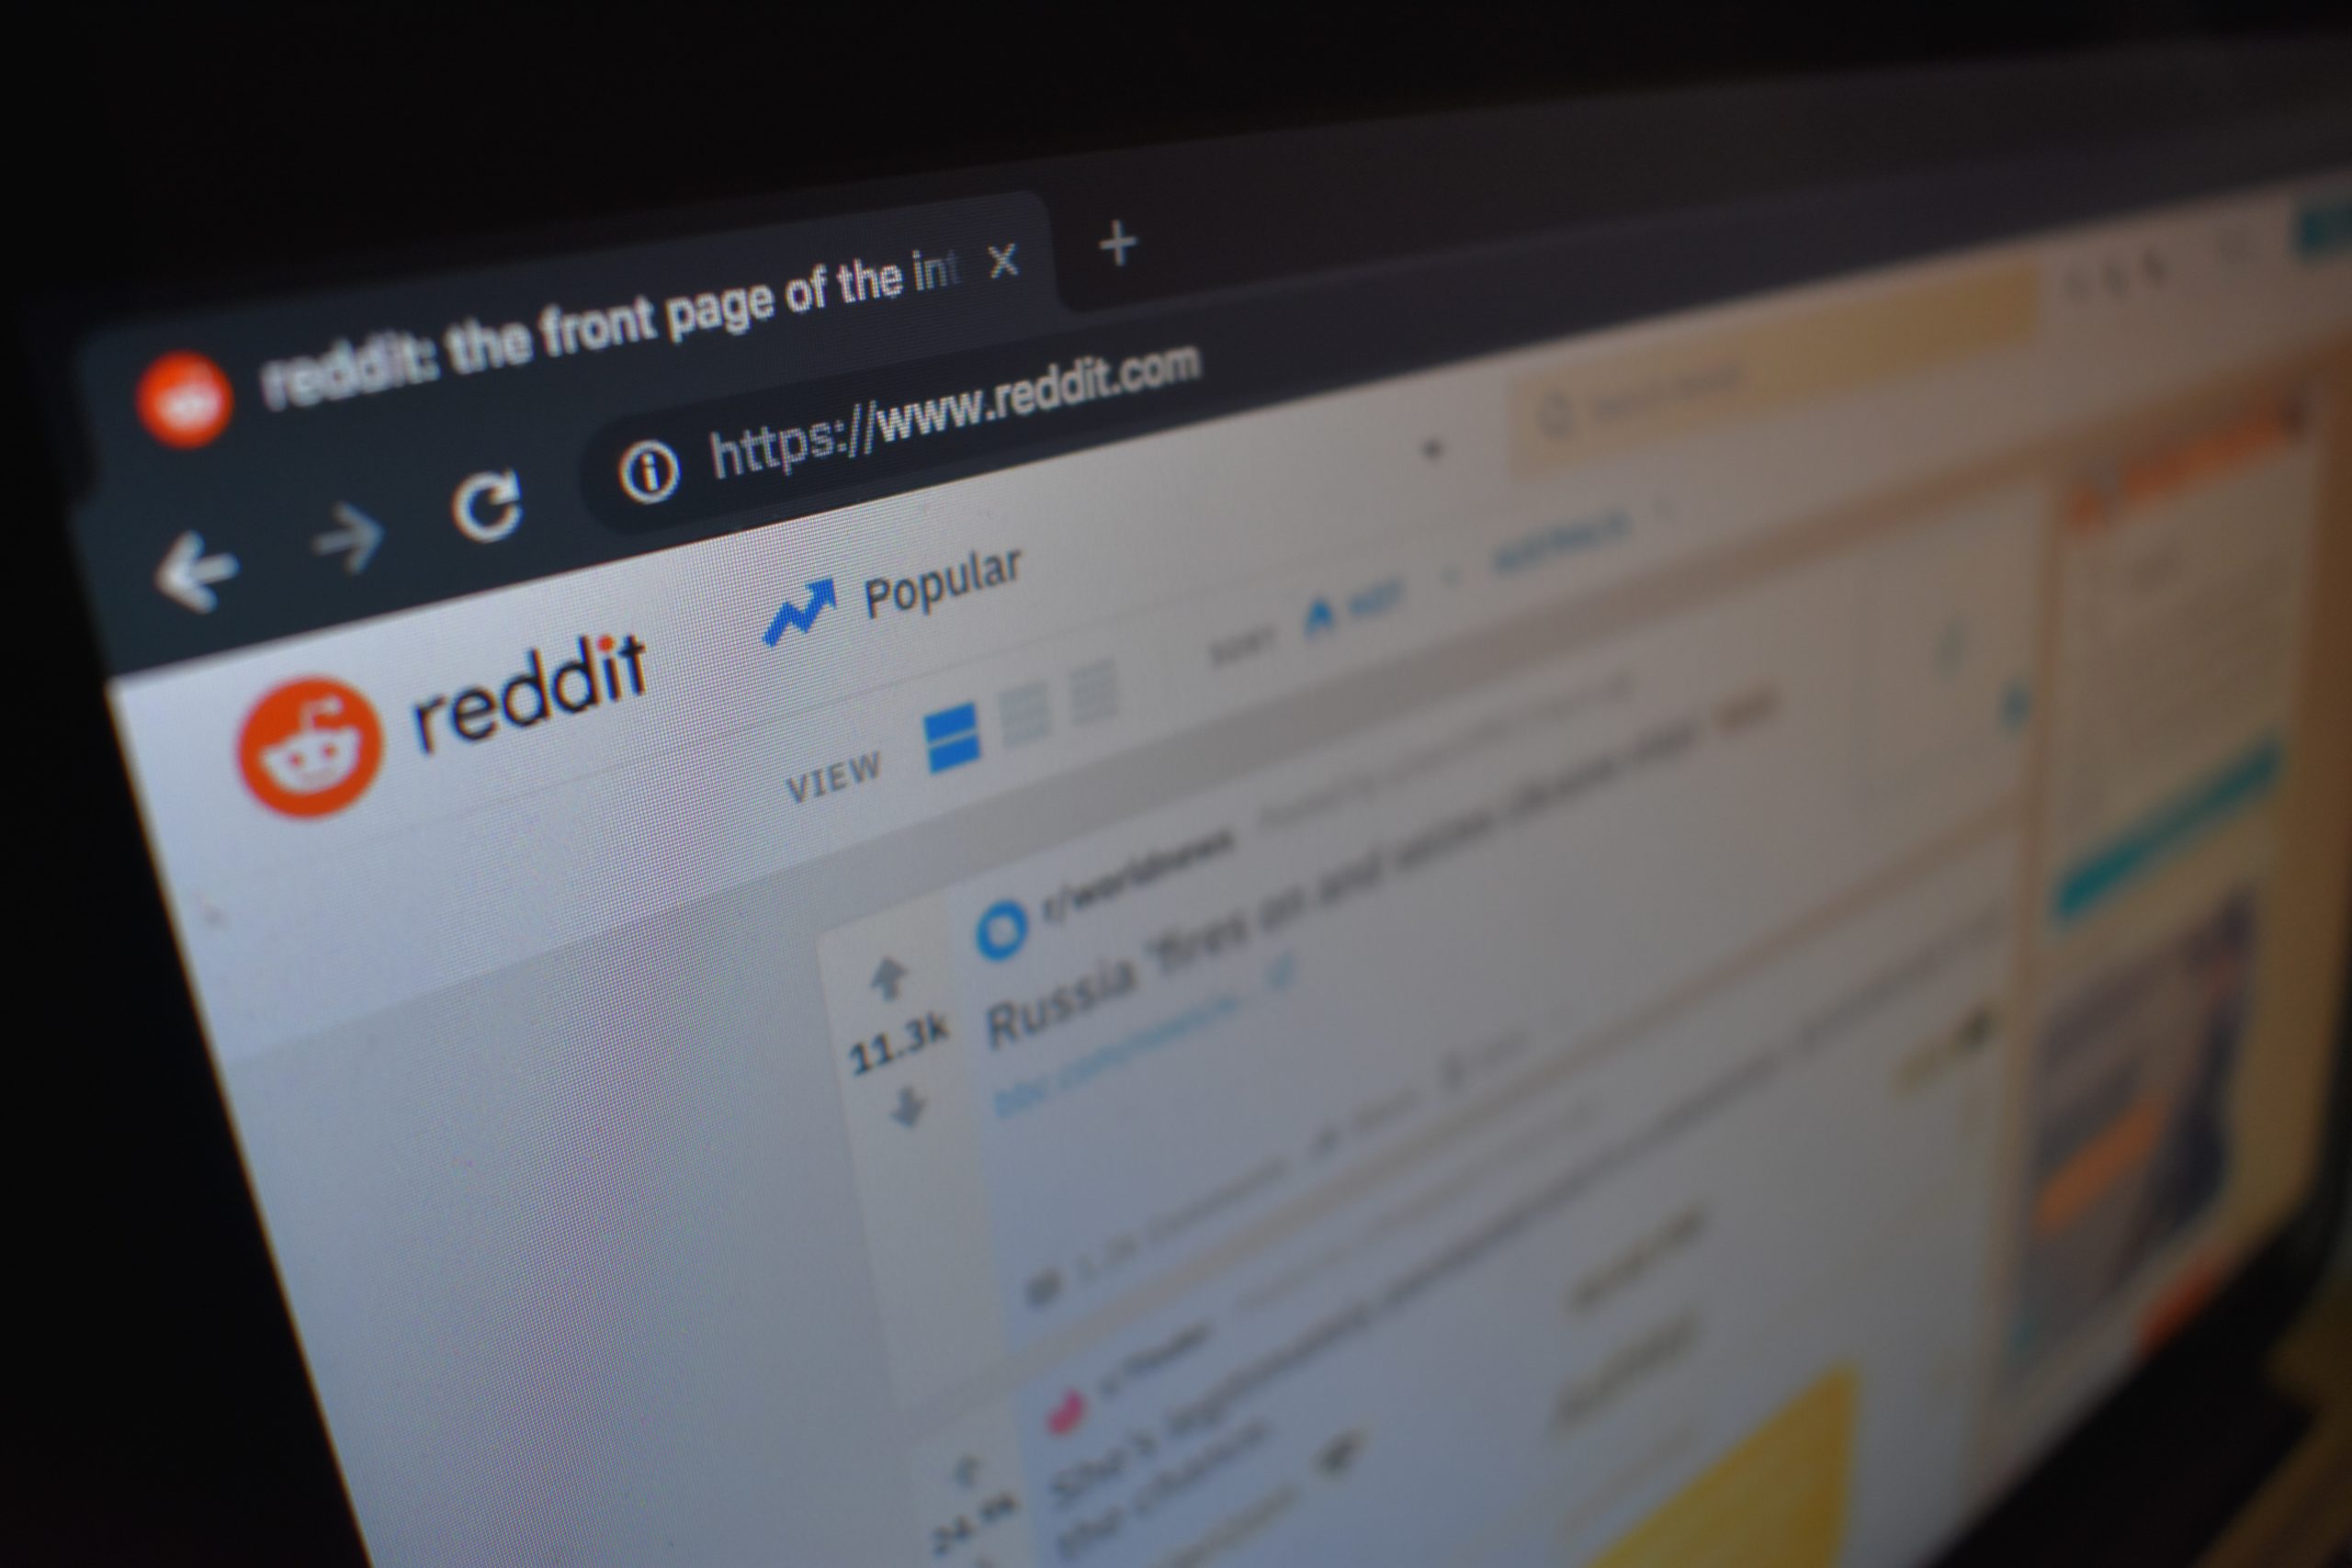 Hackers are defacing Reddit with pro-Trump messages